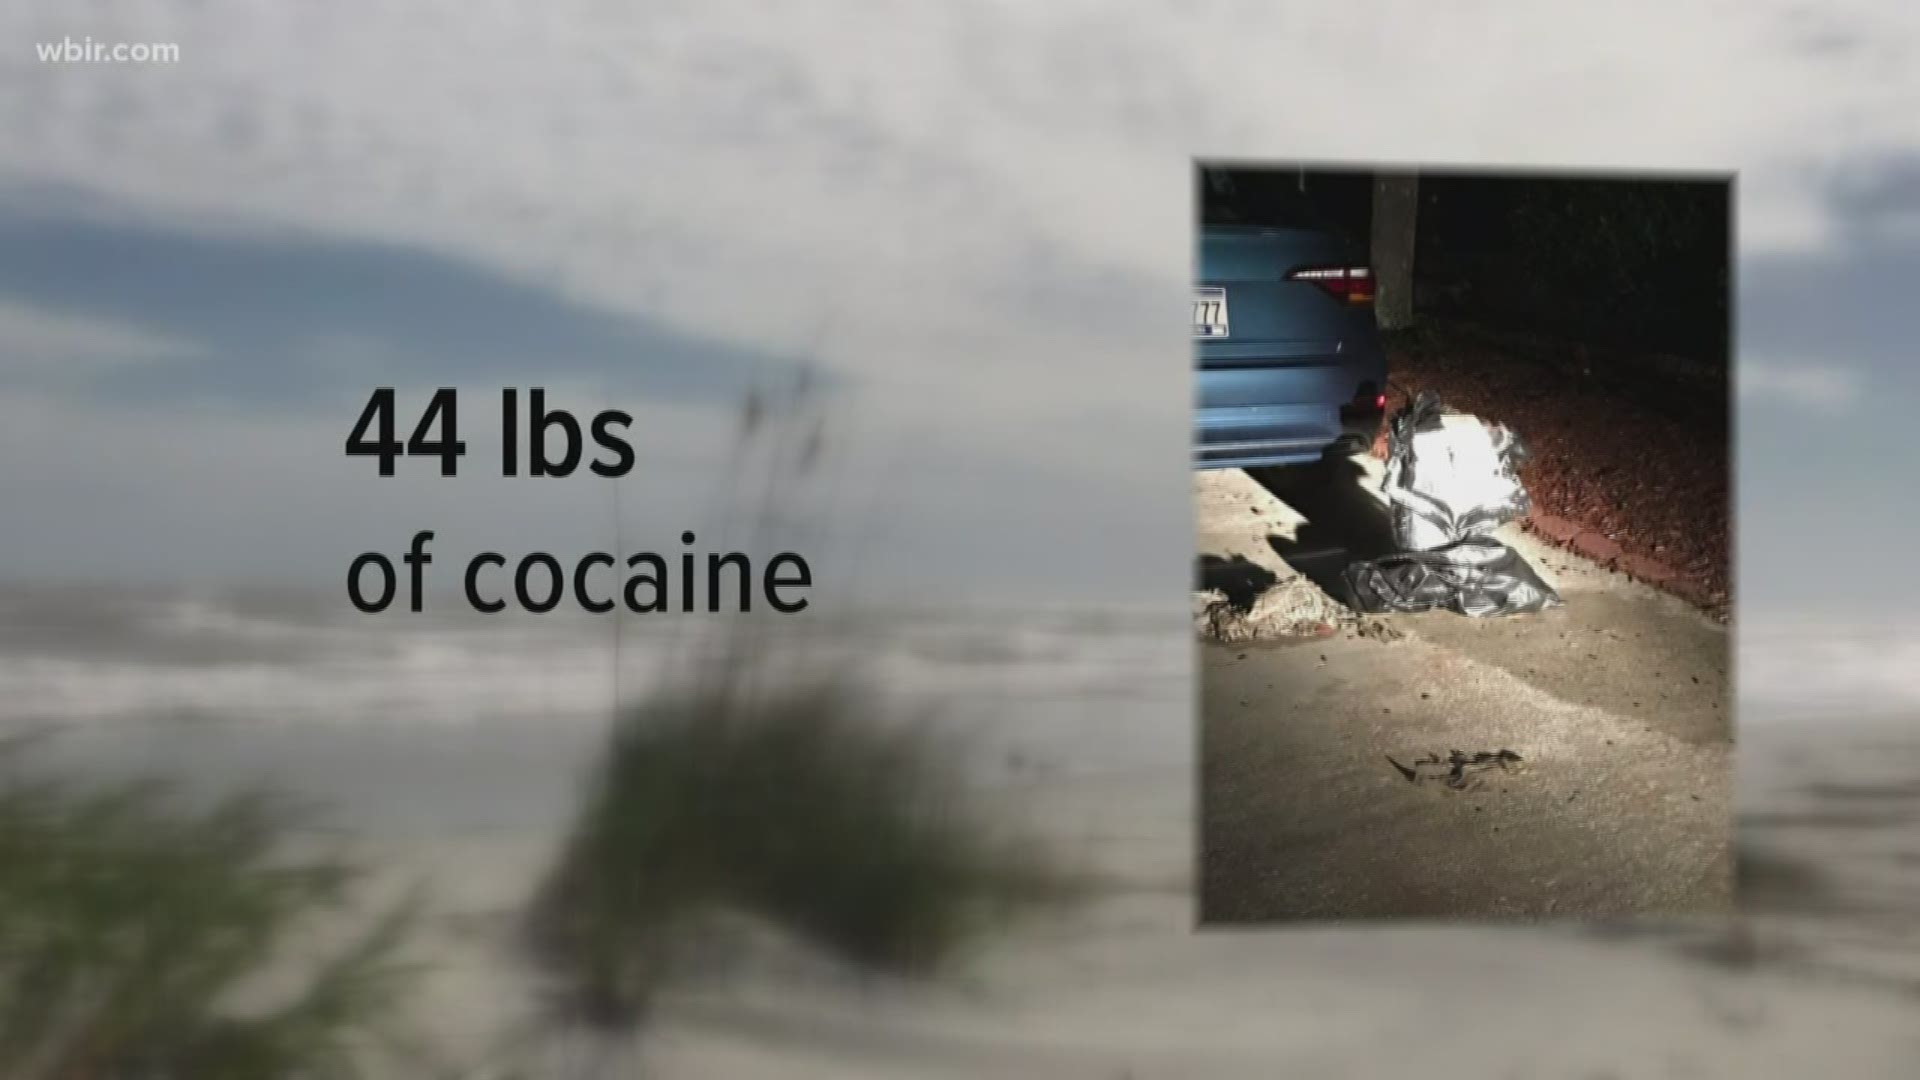 Imagine you and your loved ones are enjoying a quiet night on the beach, when suddenly what you think is a turtle washes ashore... but it turns out to be cocaine.